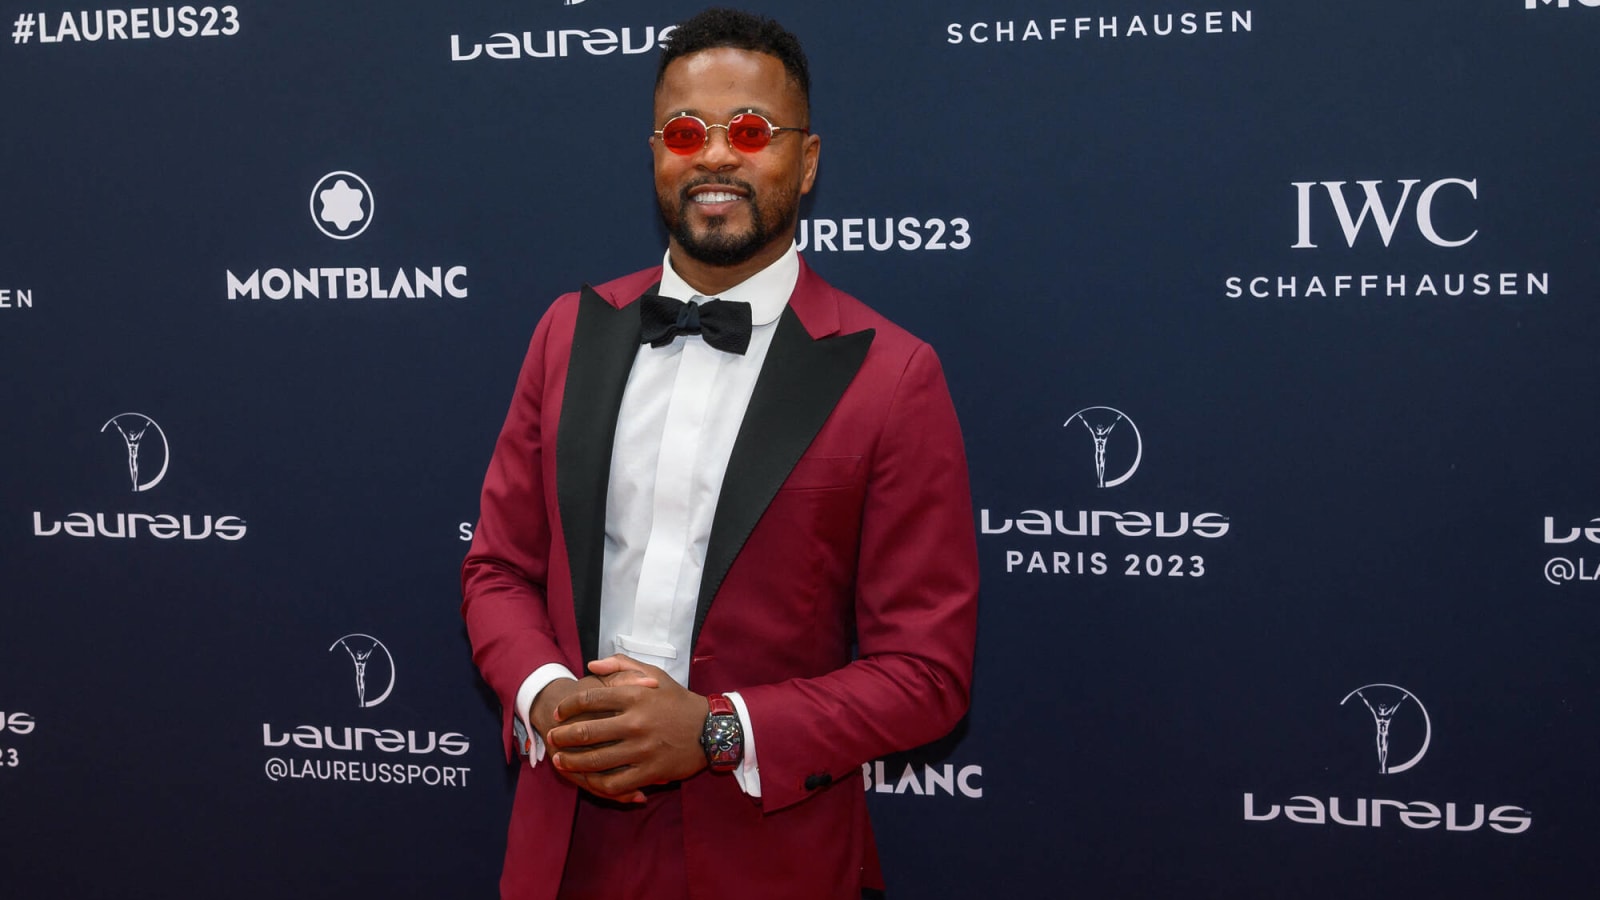 Watch: Former Man United star Patrice Evra turns up at Man City in a red suit